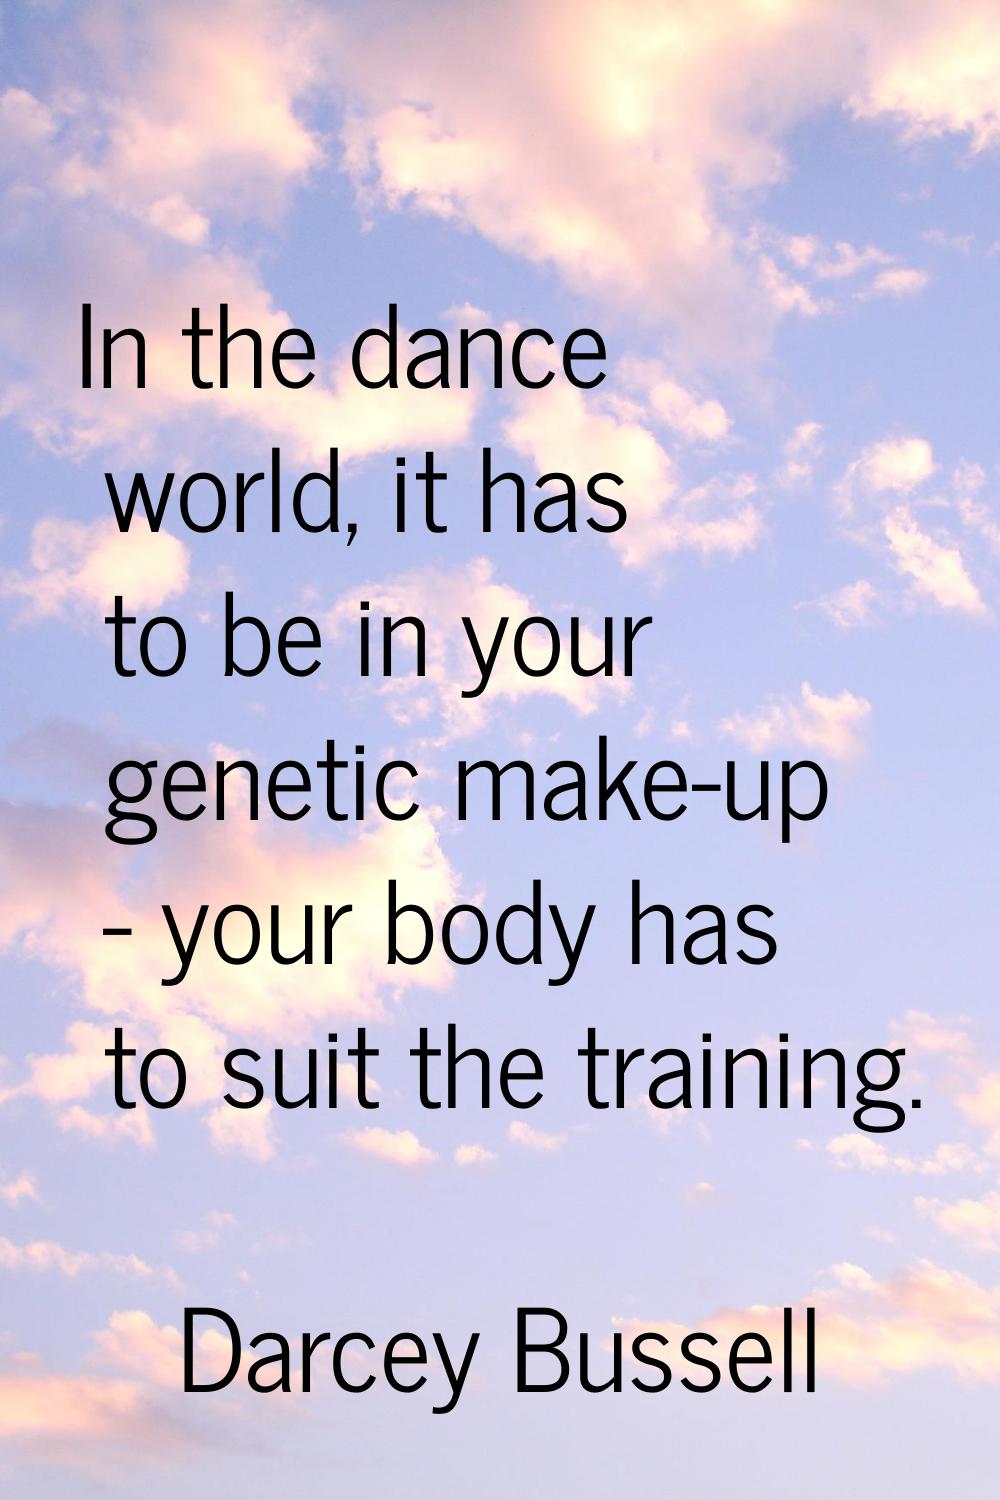 In the dance world, it has to be in your genetic make-up - your body has to suit the training.